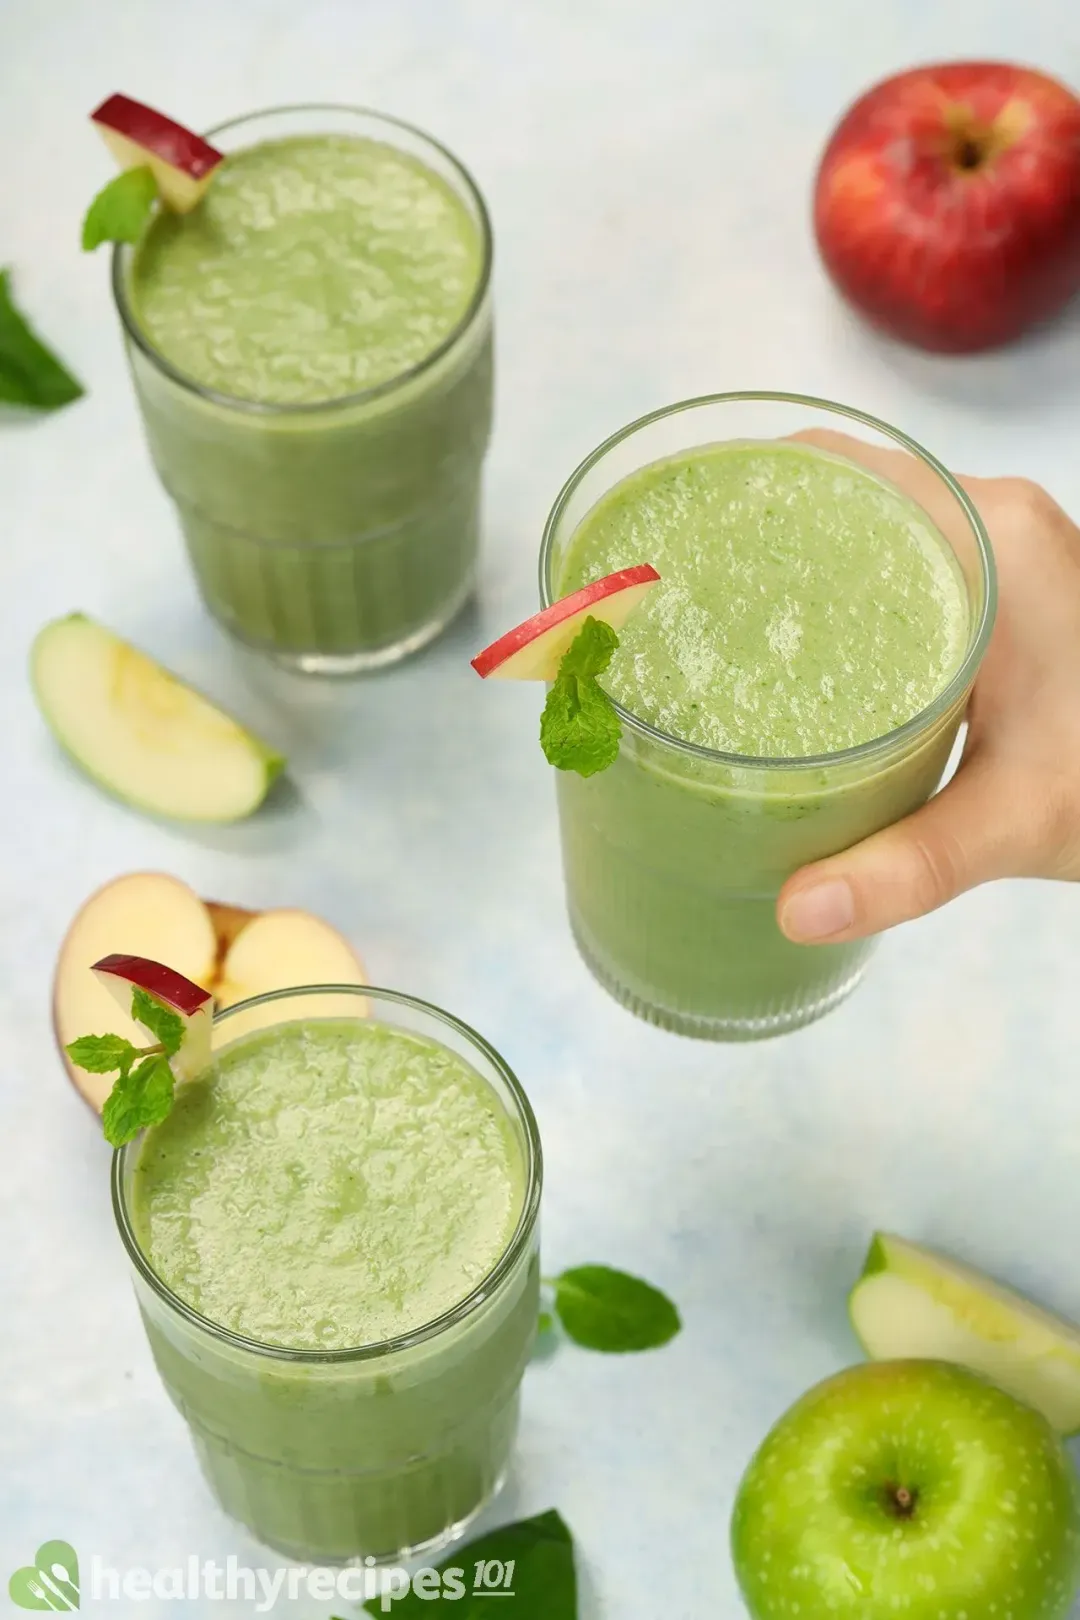 What Greens Are Best for Smoothies